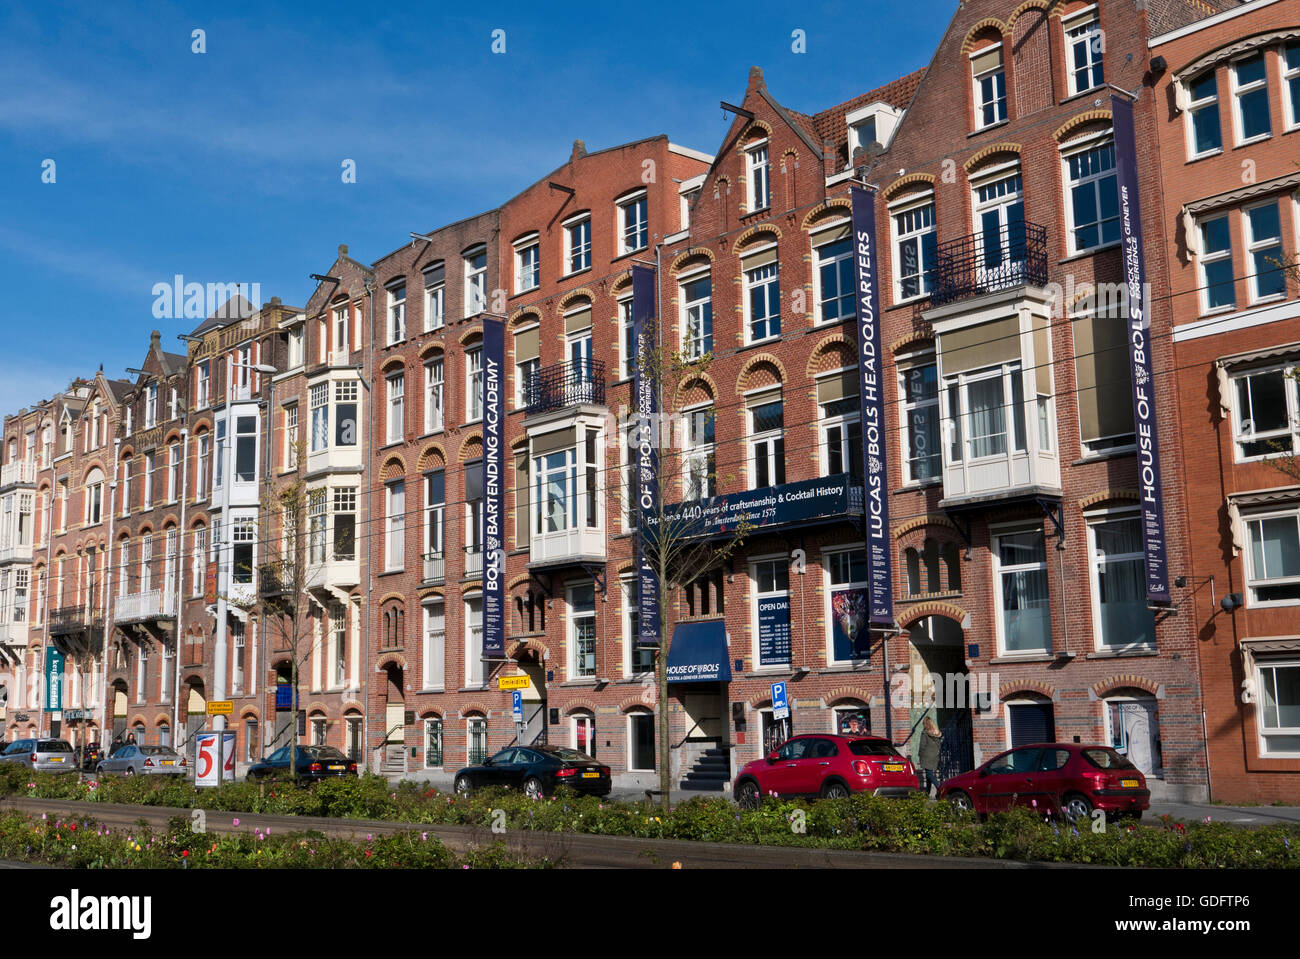 The House of Bols gin museum in Amsterdam, Holland, Netherlands Stock Photo  - Alamy